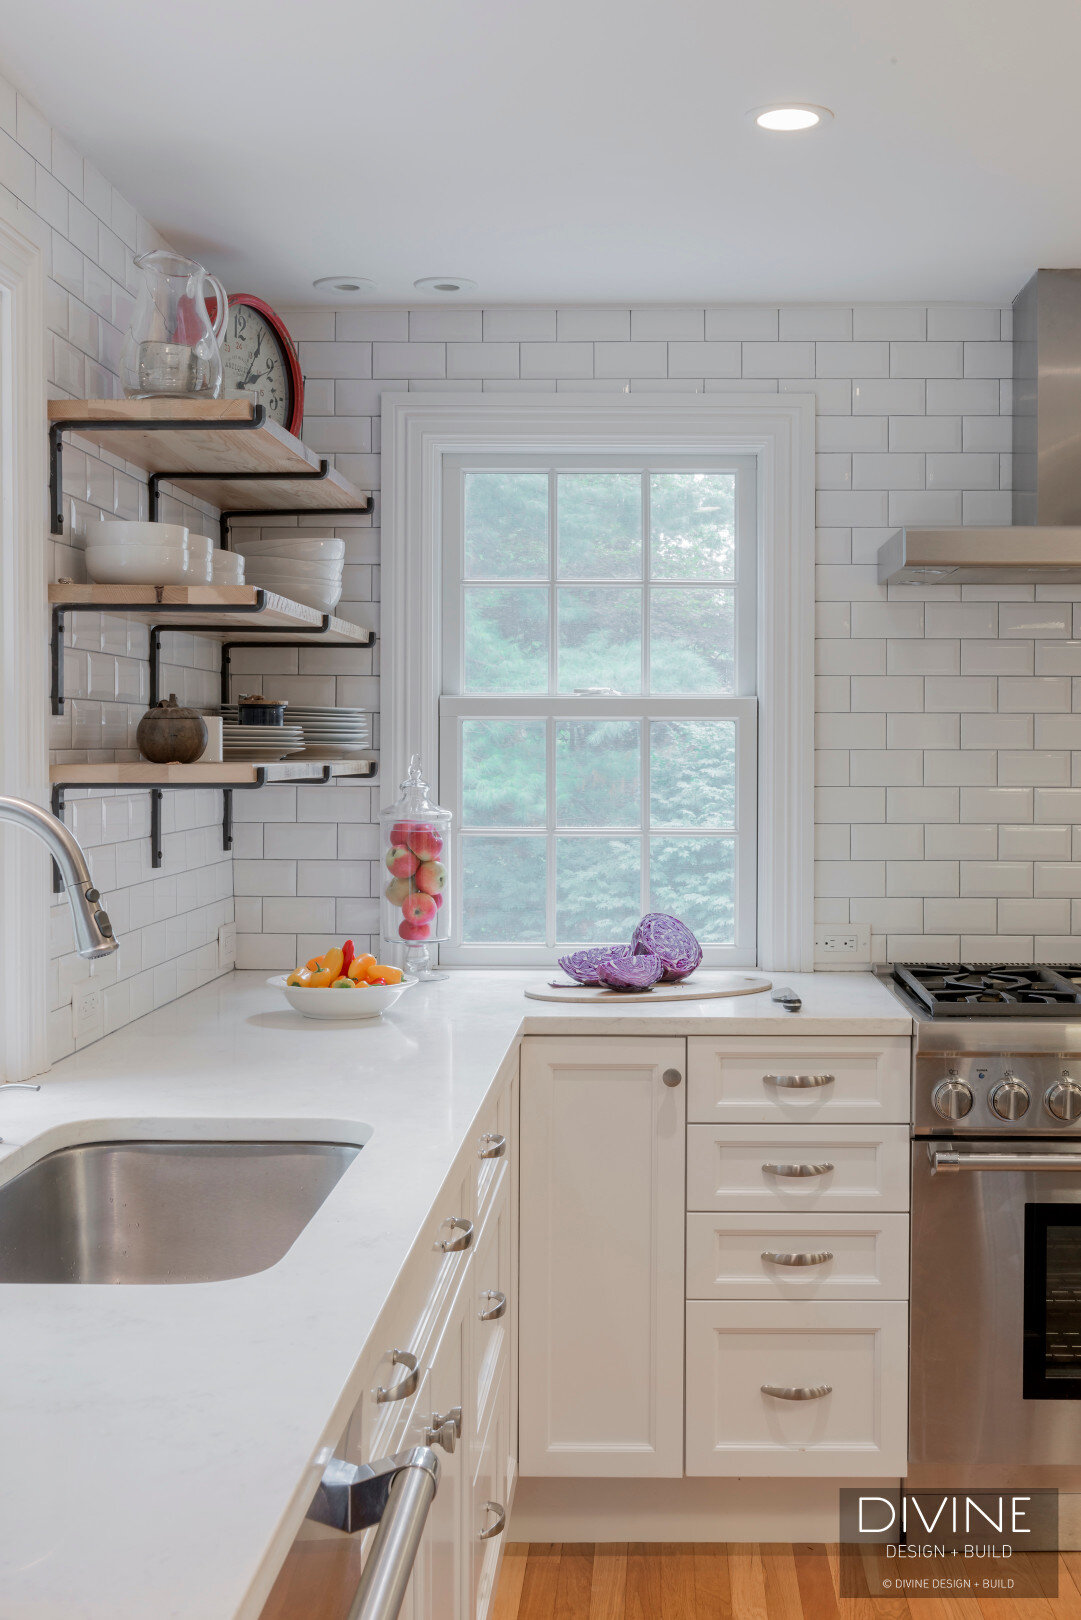  Grey and white transitional style kitchen with shaker cabinets and integrated dog feeding station. Chalkboard. Subway tile backsplash and industrial style lights and shelving